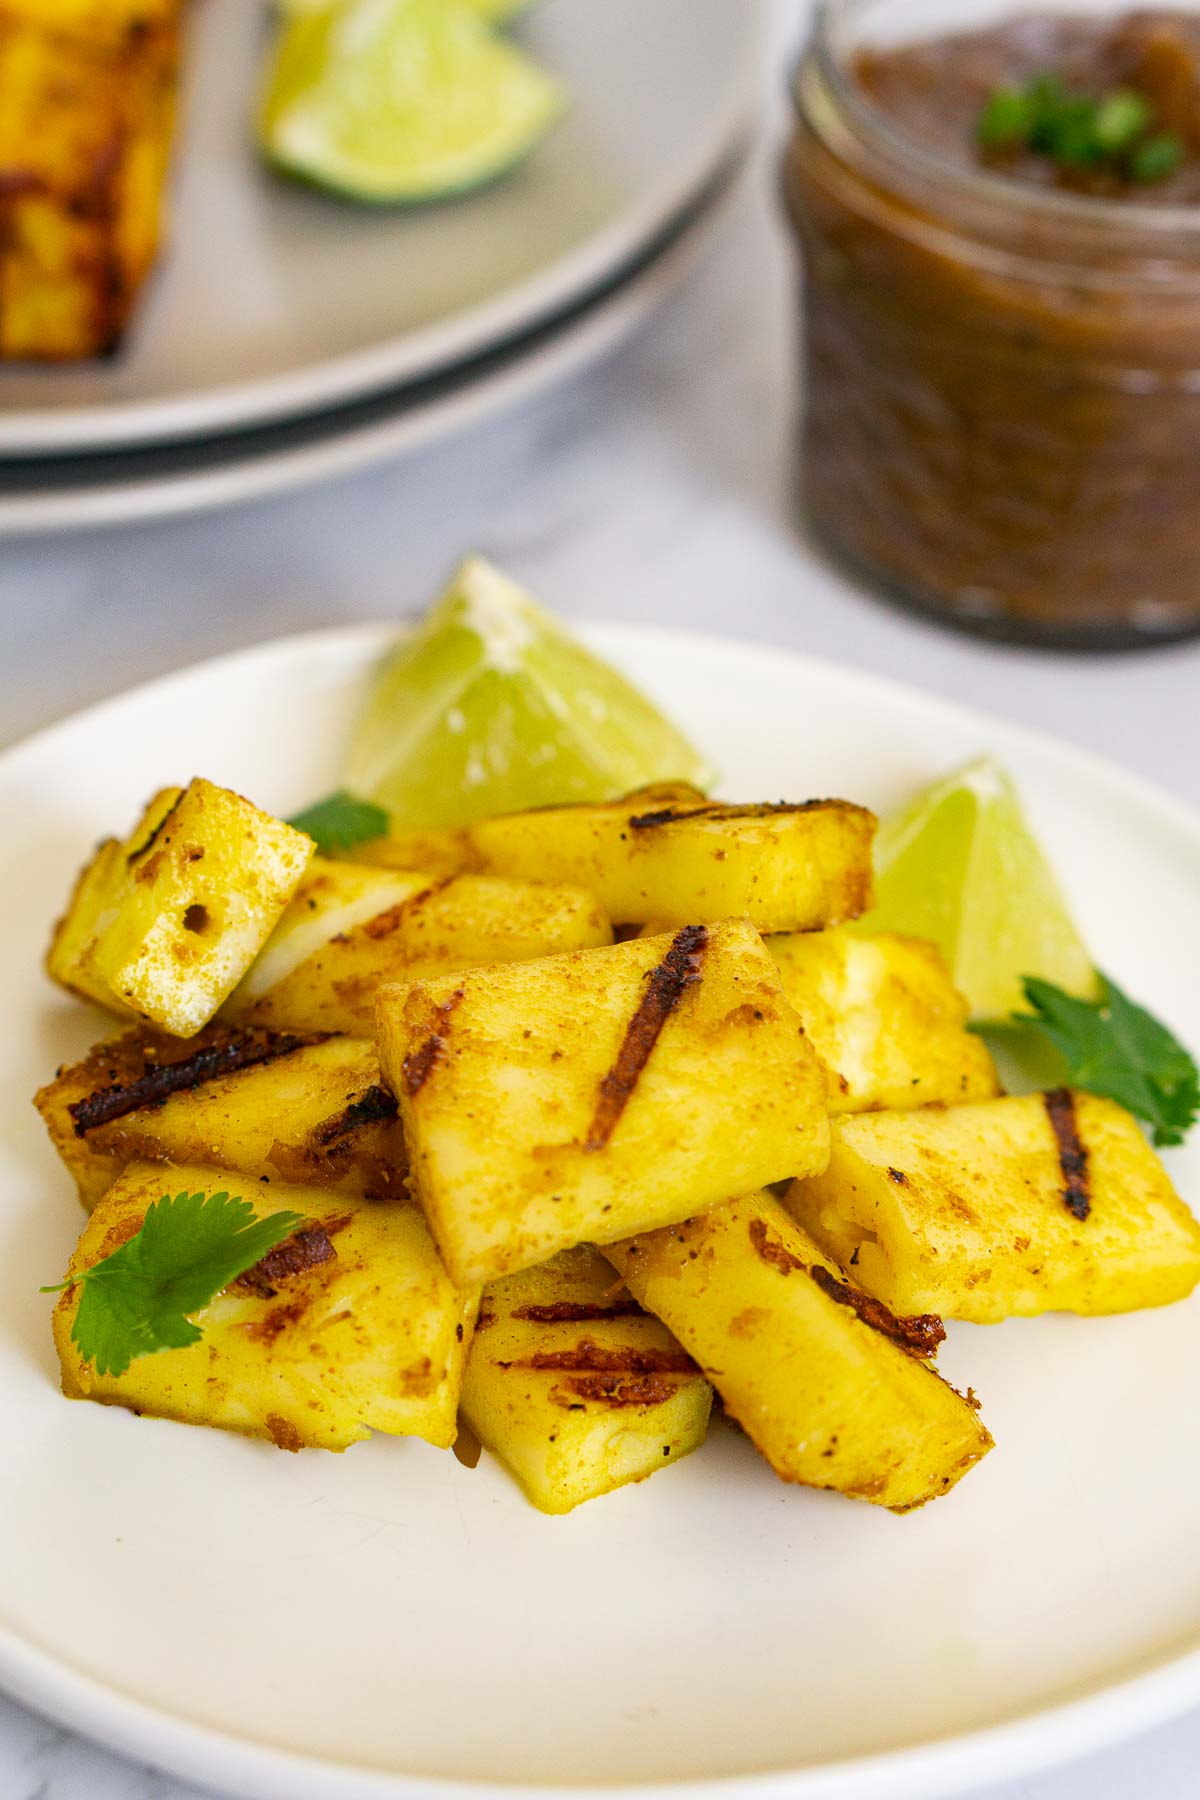 Pieces of grilled paneer on a plate